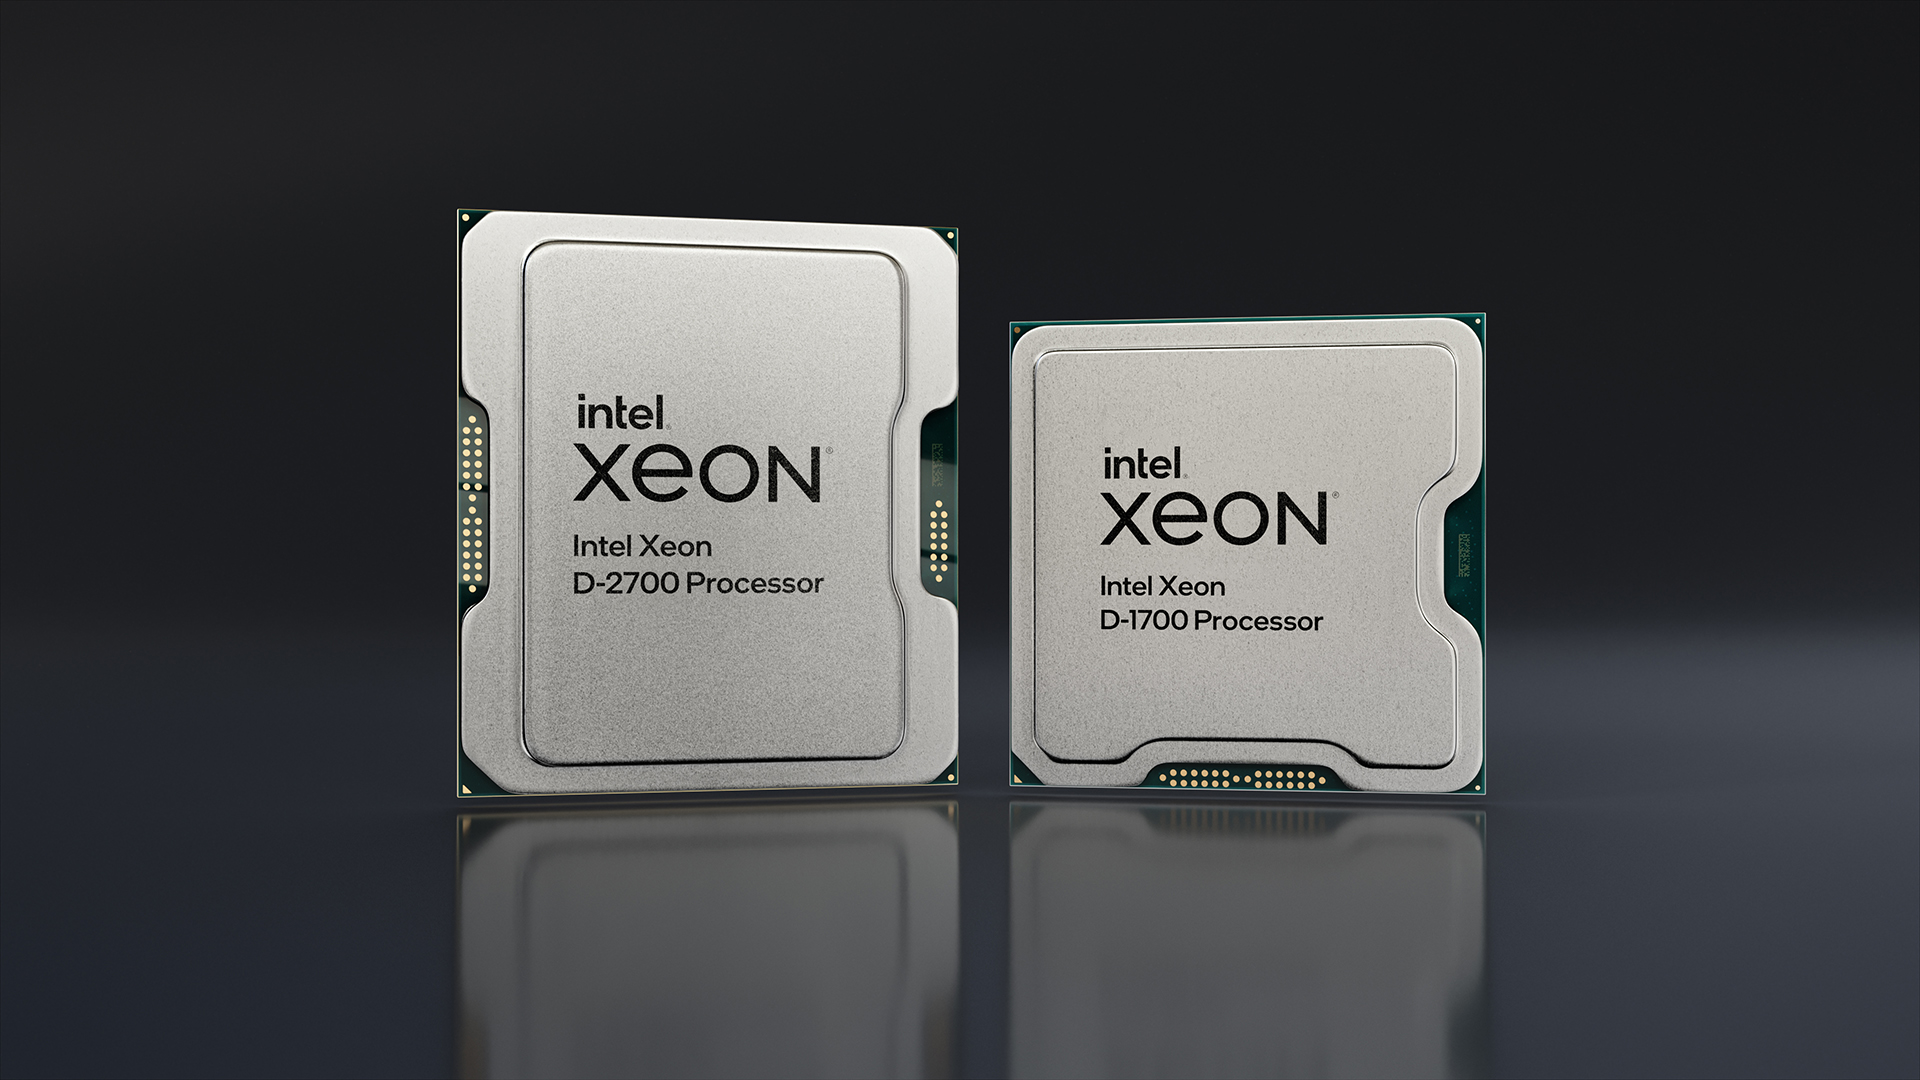 Opvoeding Verdraaiing Hardheid Intel Launches Xeon D Processor Built for the Network and Edge